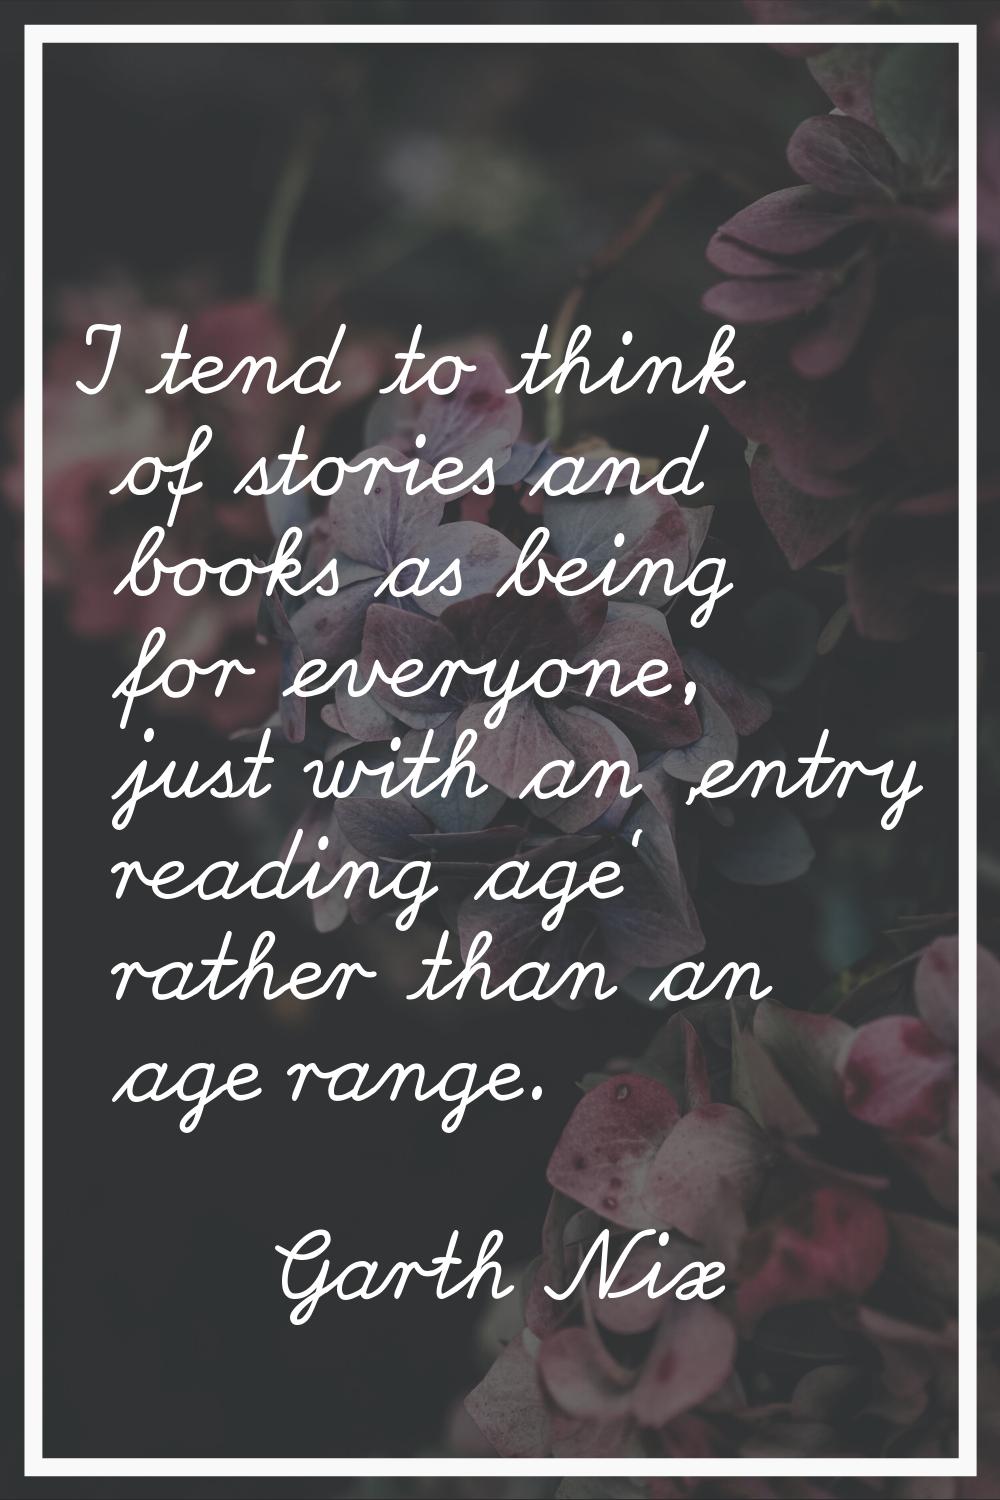 I tend to think of stories and books as being for everyone, just with an 'entry reading age' rather